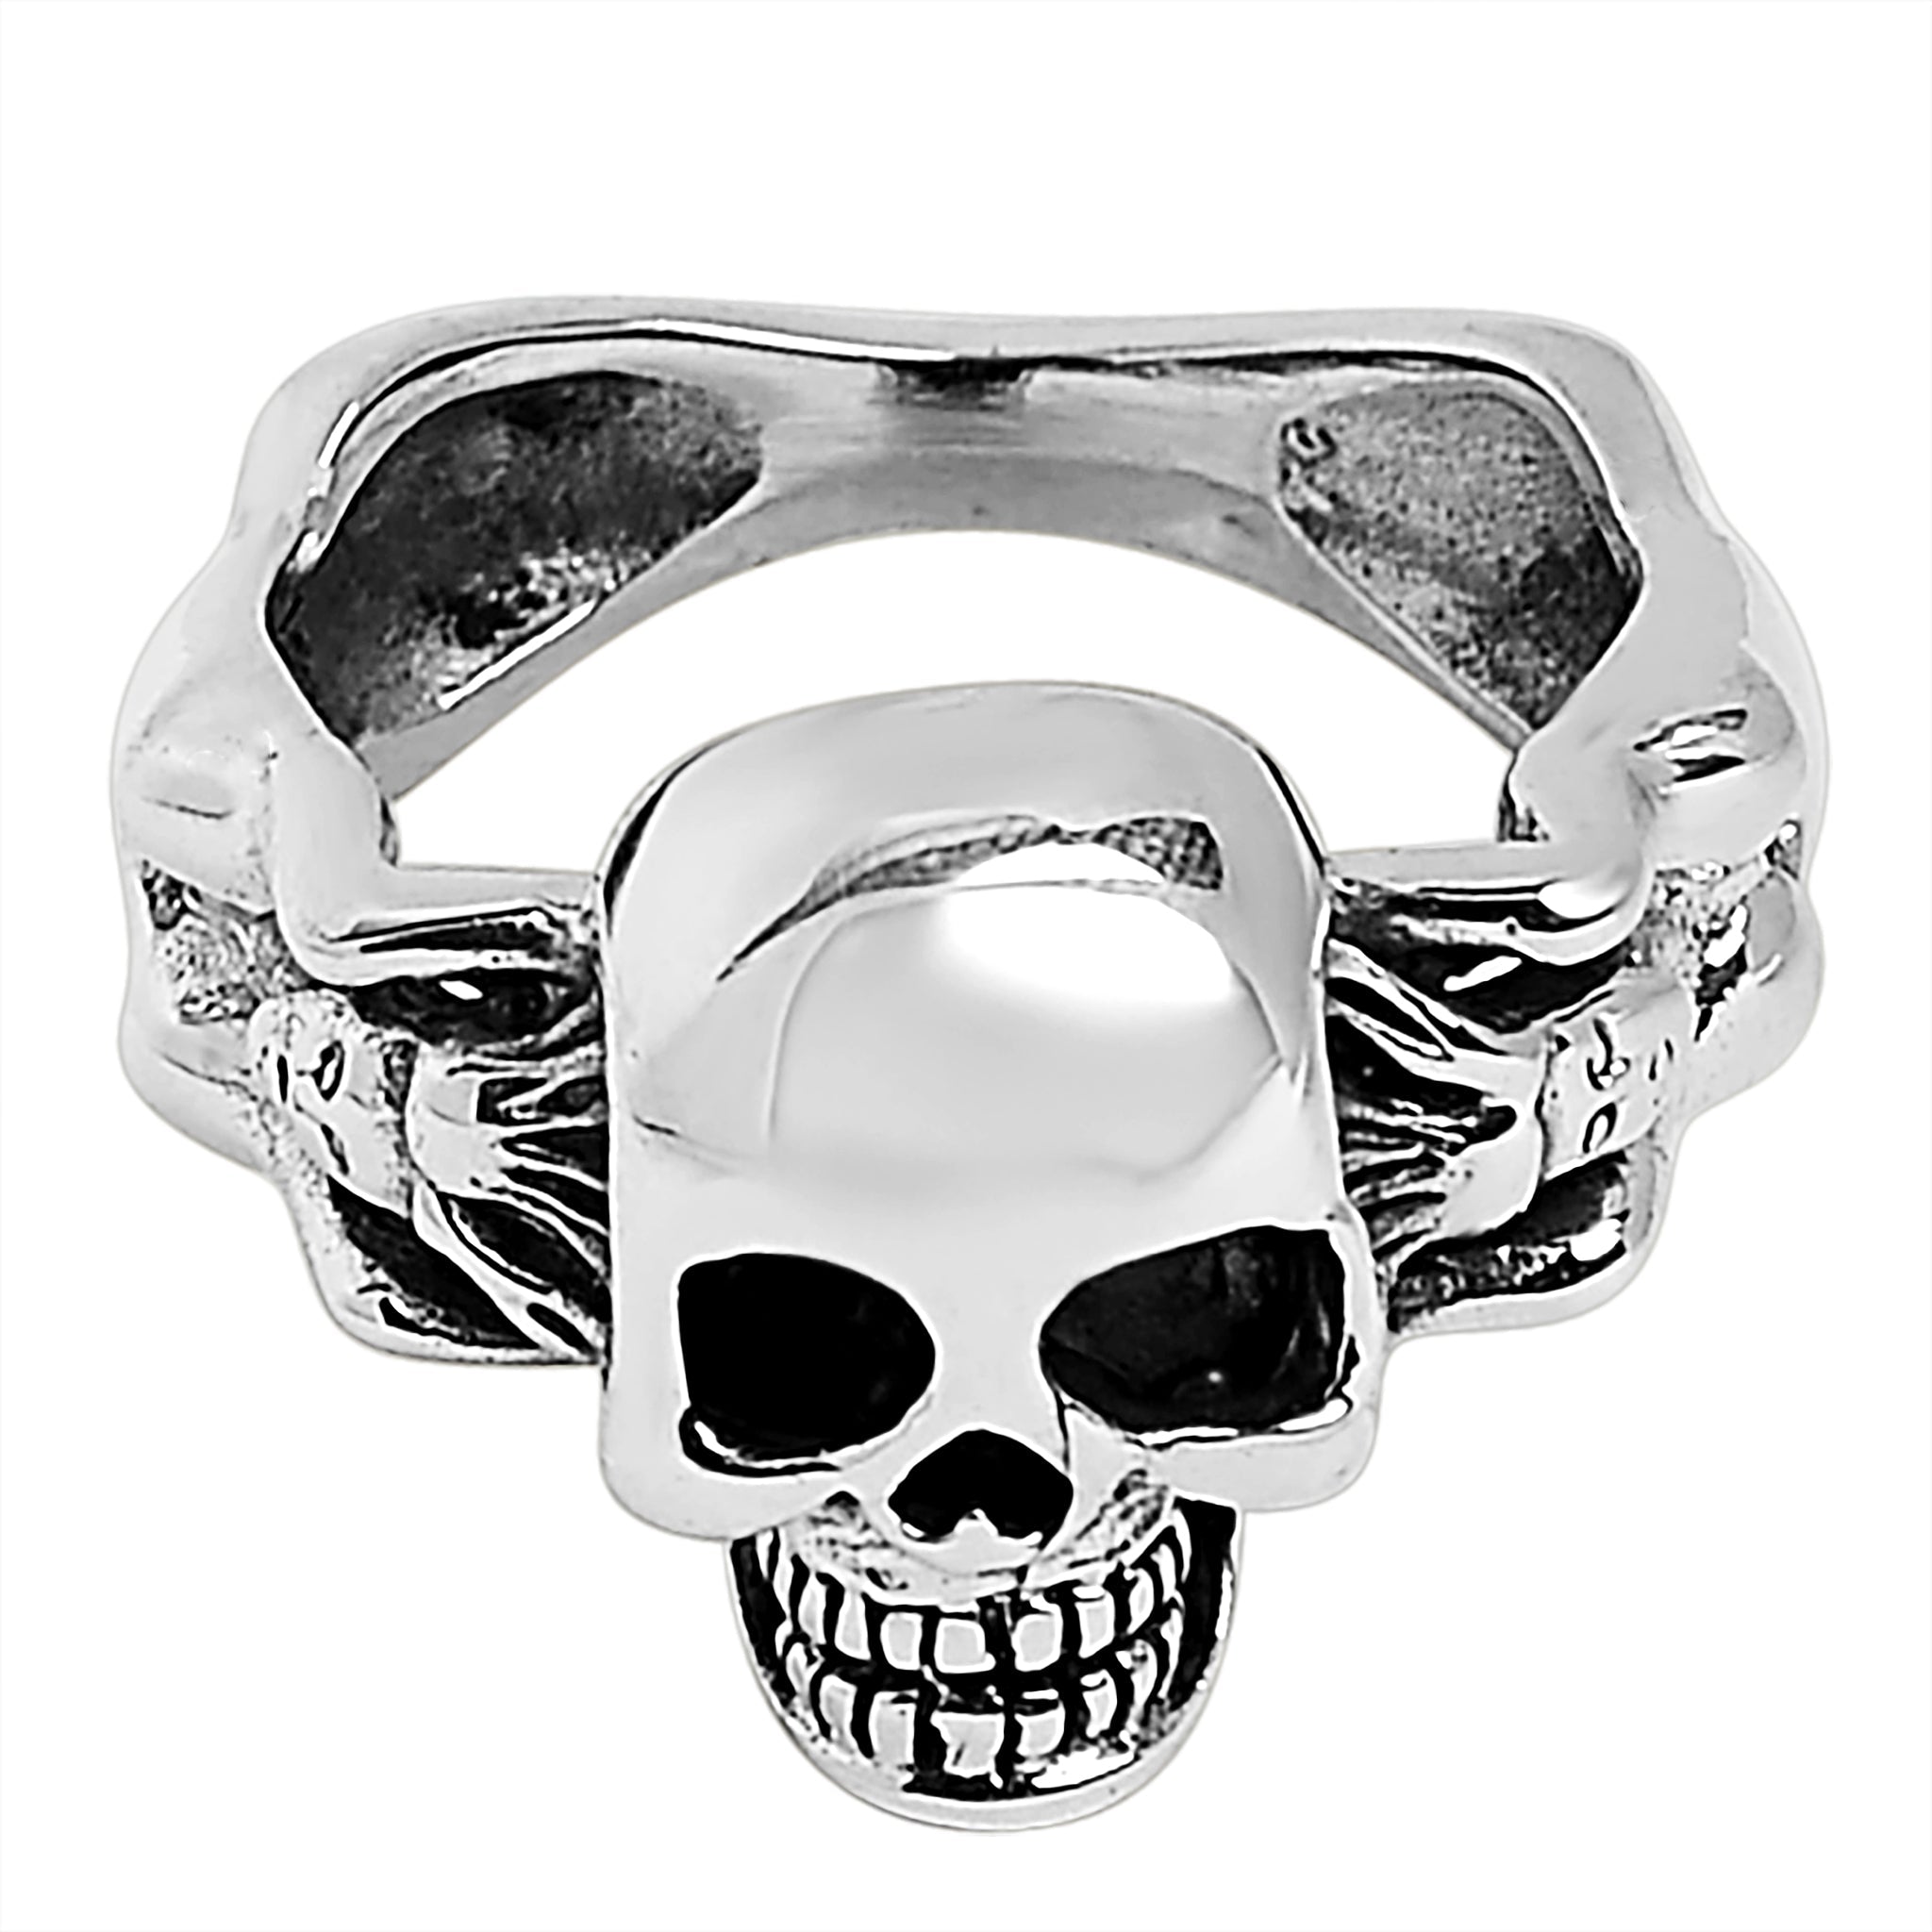 Sterling silver skull and nude women ring angled down.